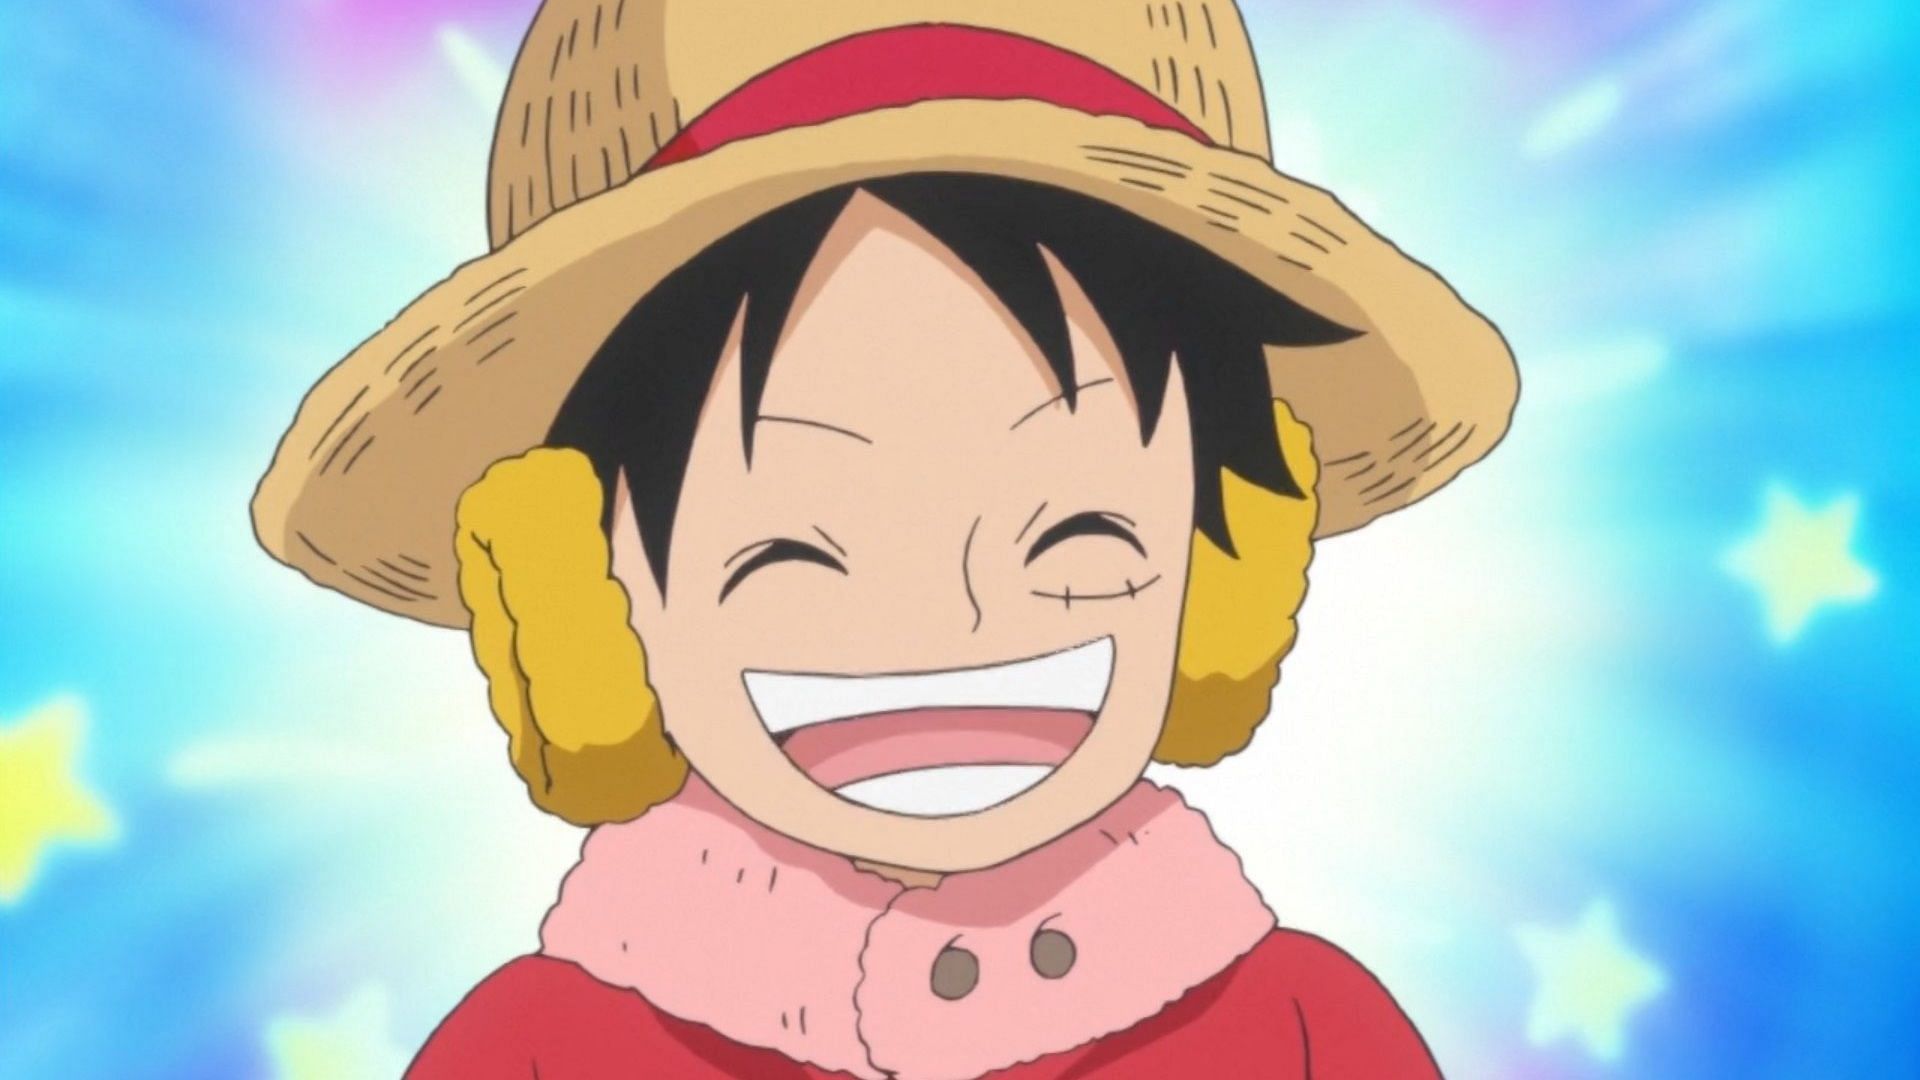 Luffy as seen in the Punk Hazard Arc (Image via Toei Animation, One Piece)